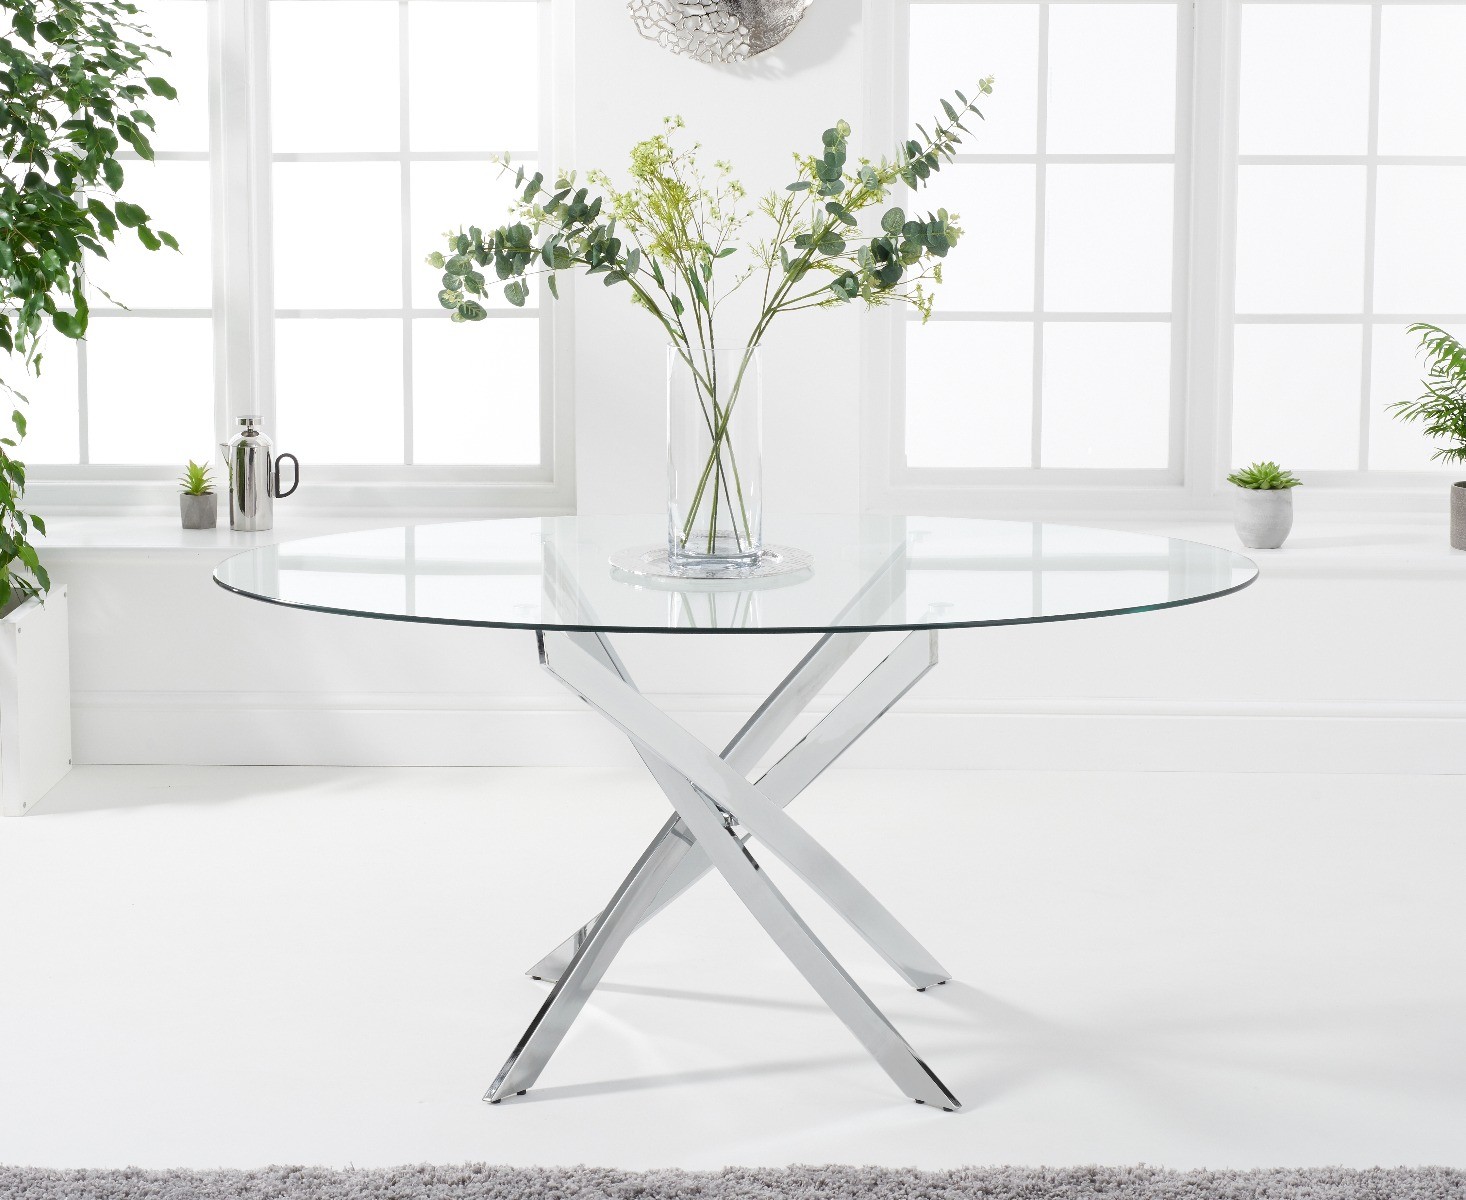 Photo 3 of Bernini 165cm oval glass dining table with 6 grey angelo chairs